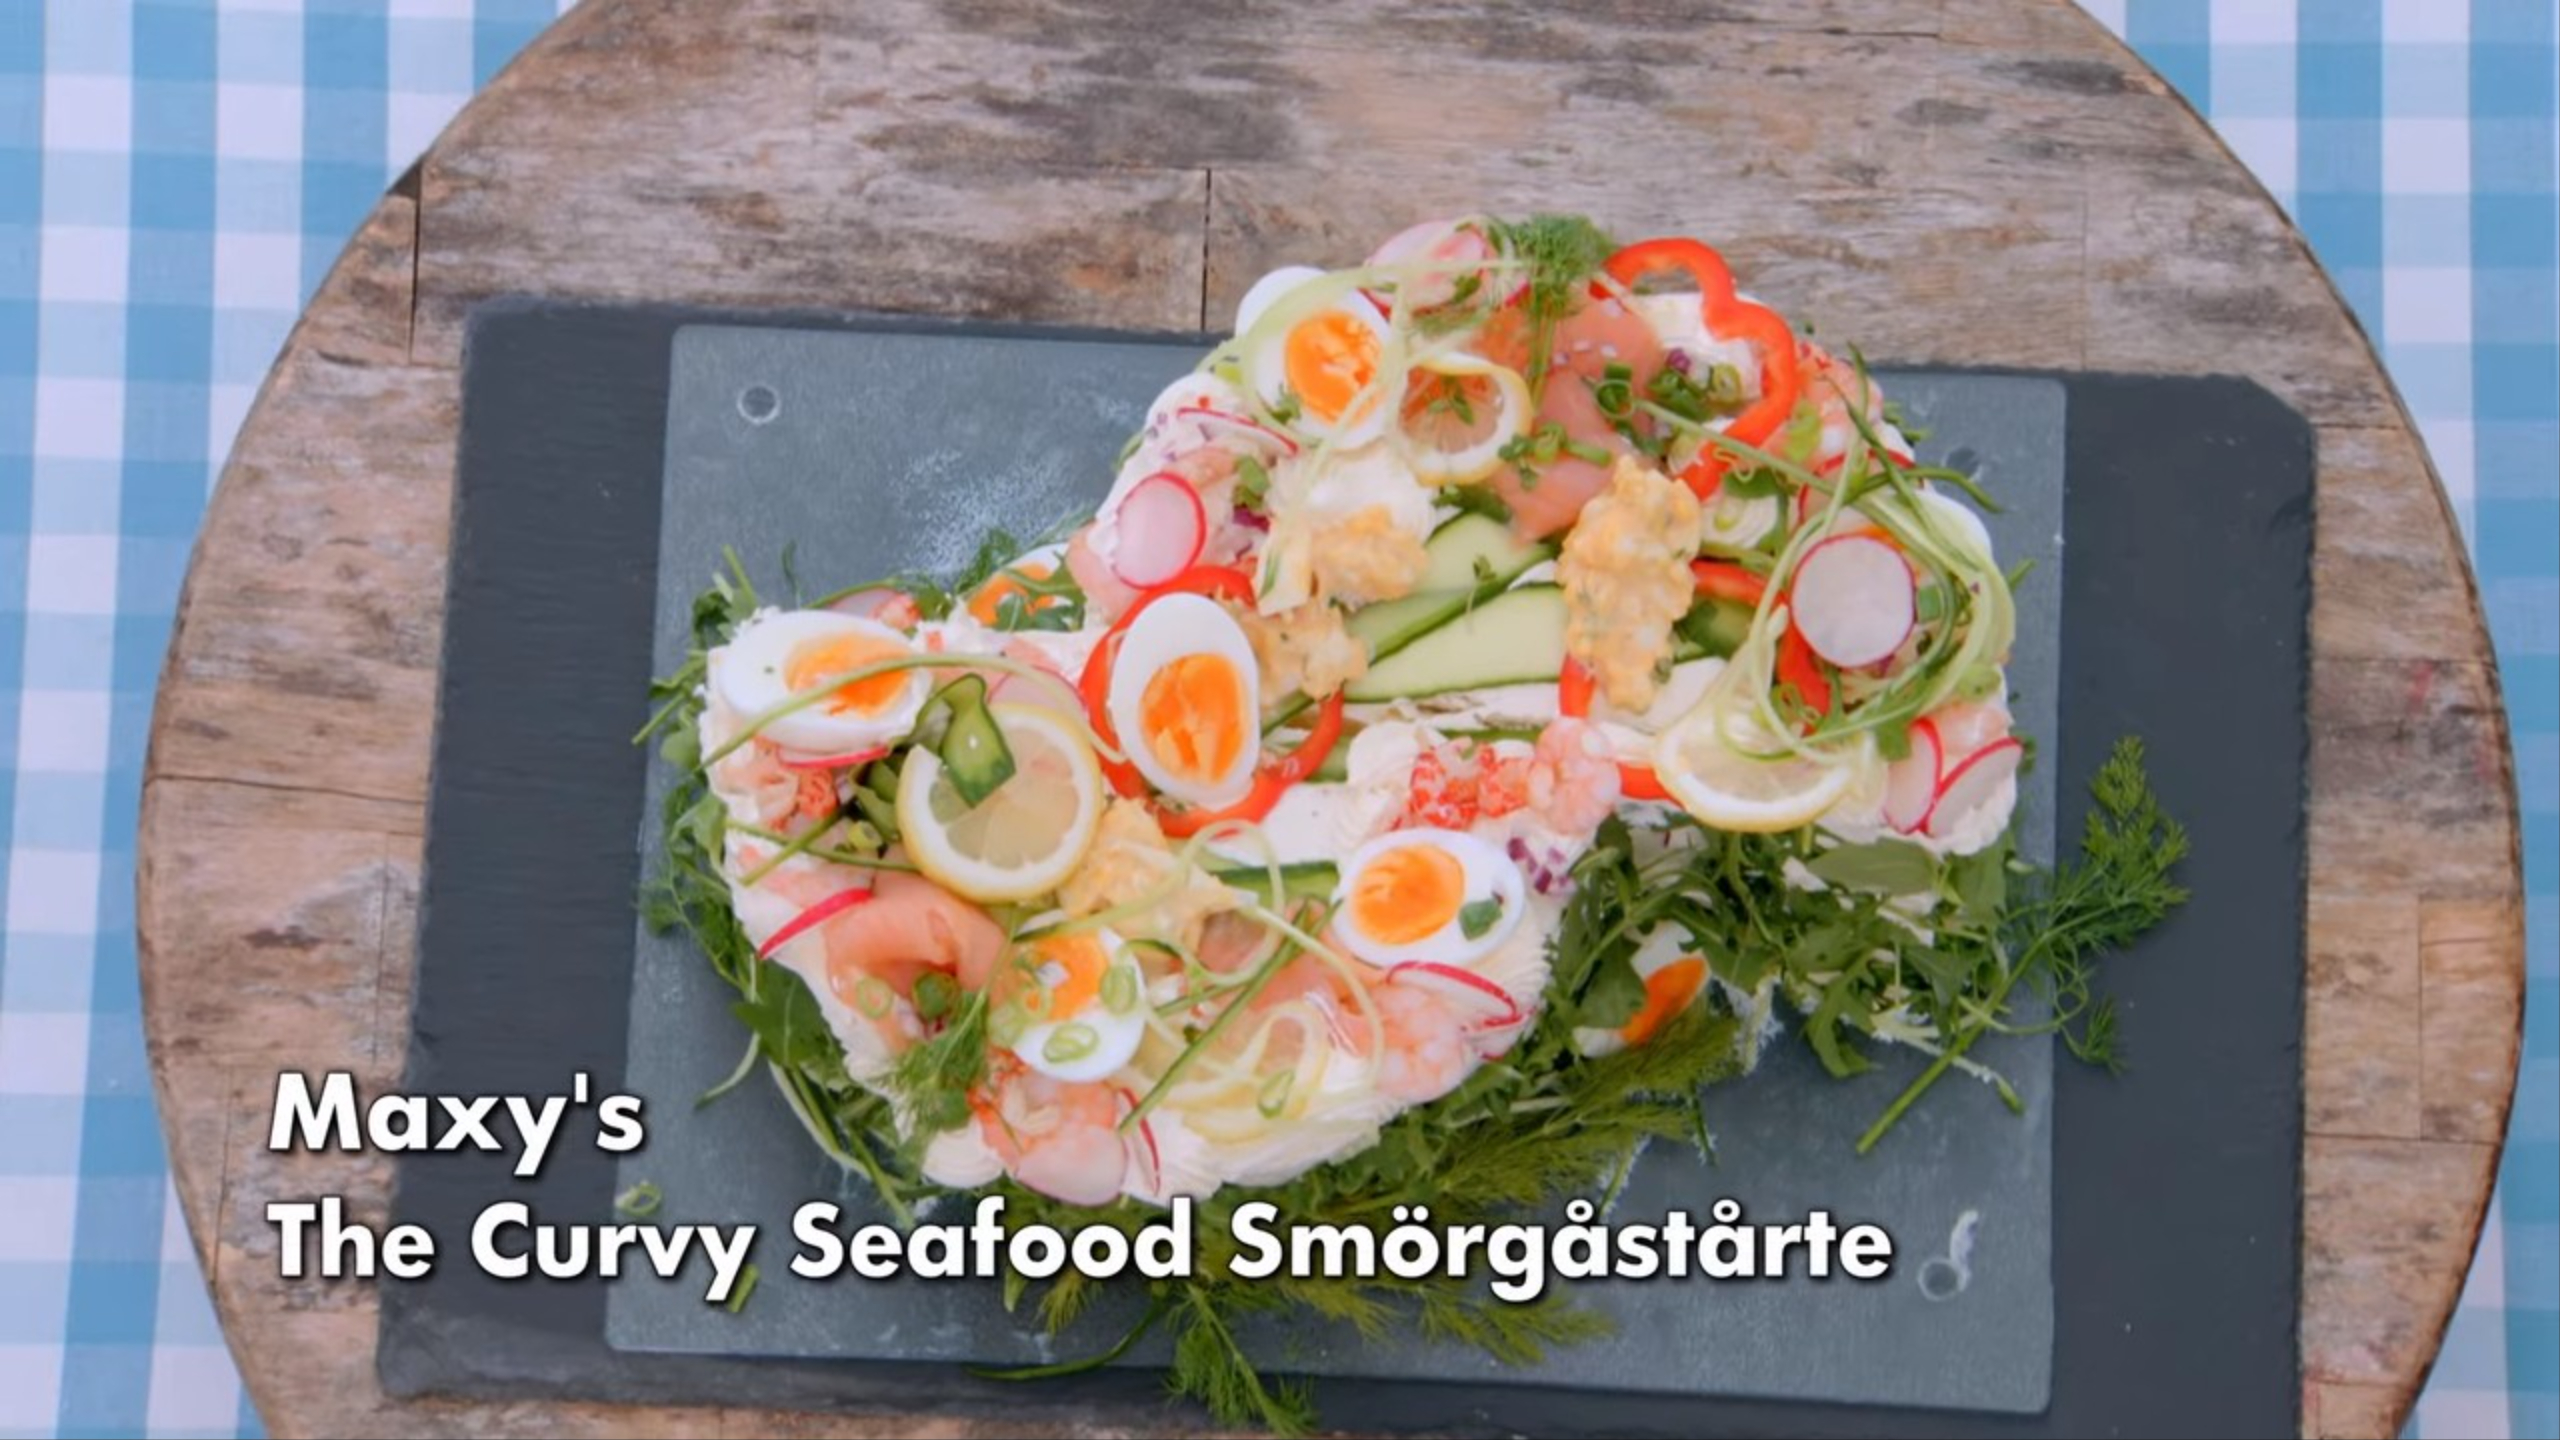 Picture shows: Maxy's The Curvy Seafood Smörgåstårta Showstopper for The Great British Baking Show Season 10's Bread Week